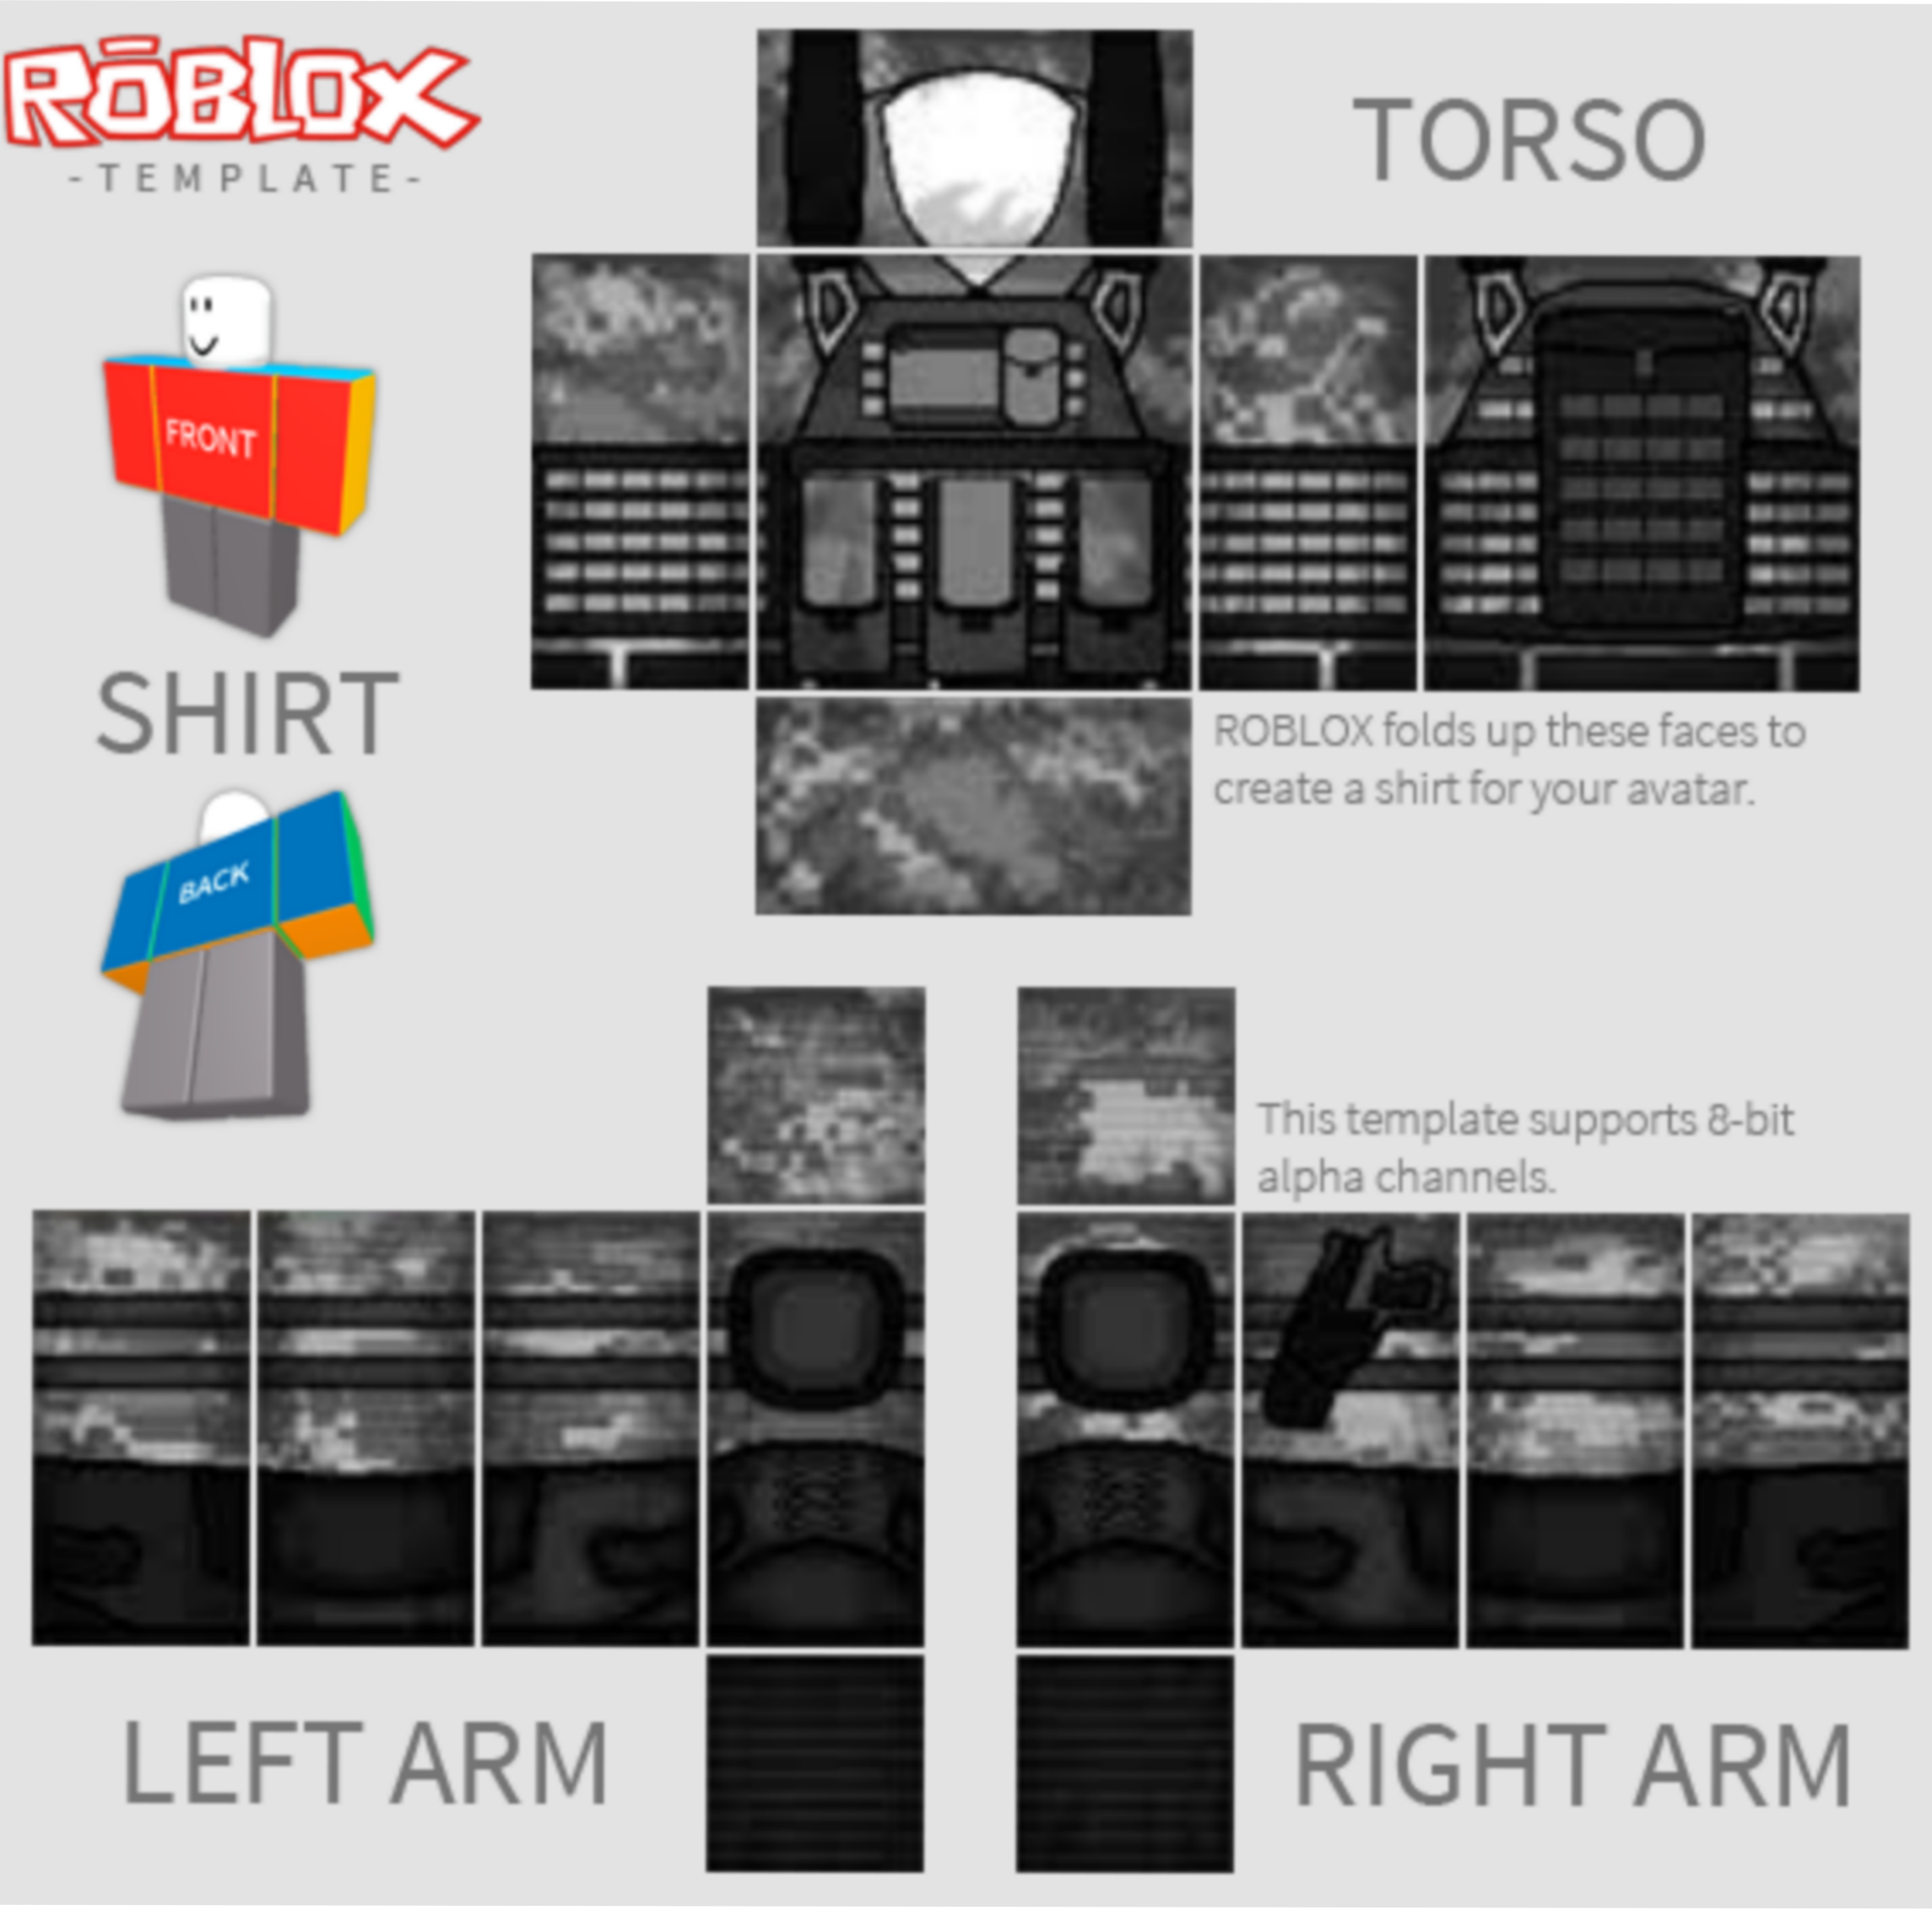 roblox-template-swat-shirt-image-by-guicorreia13795